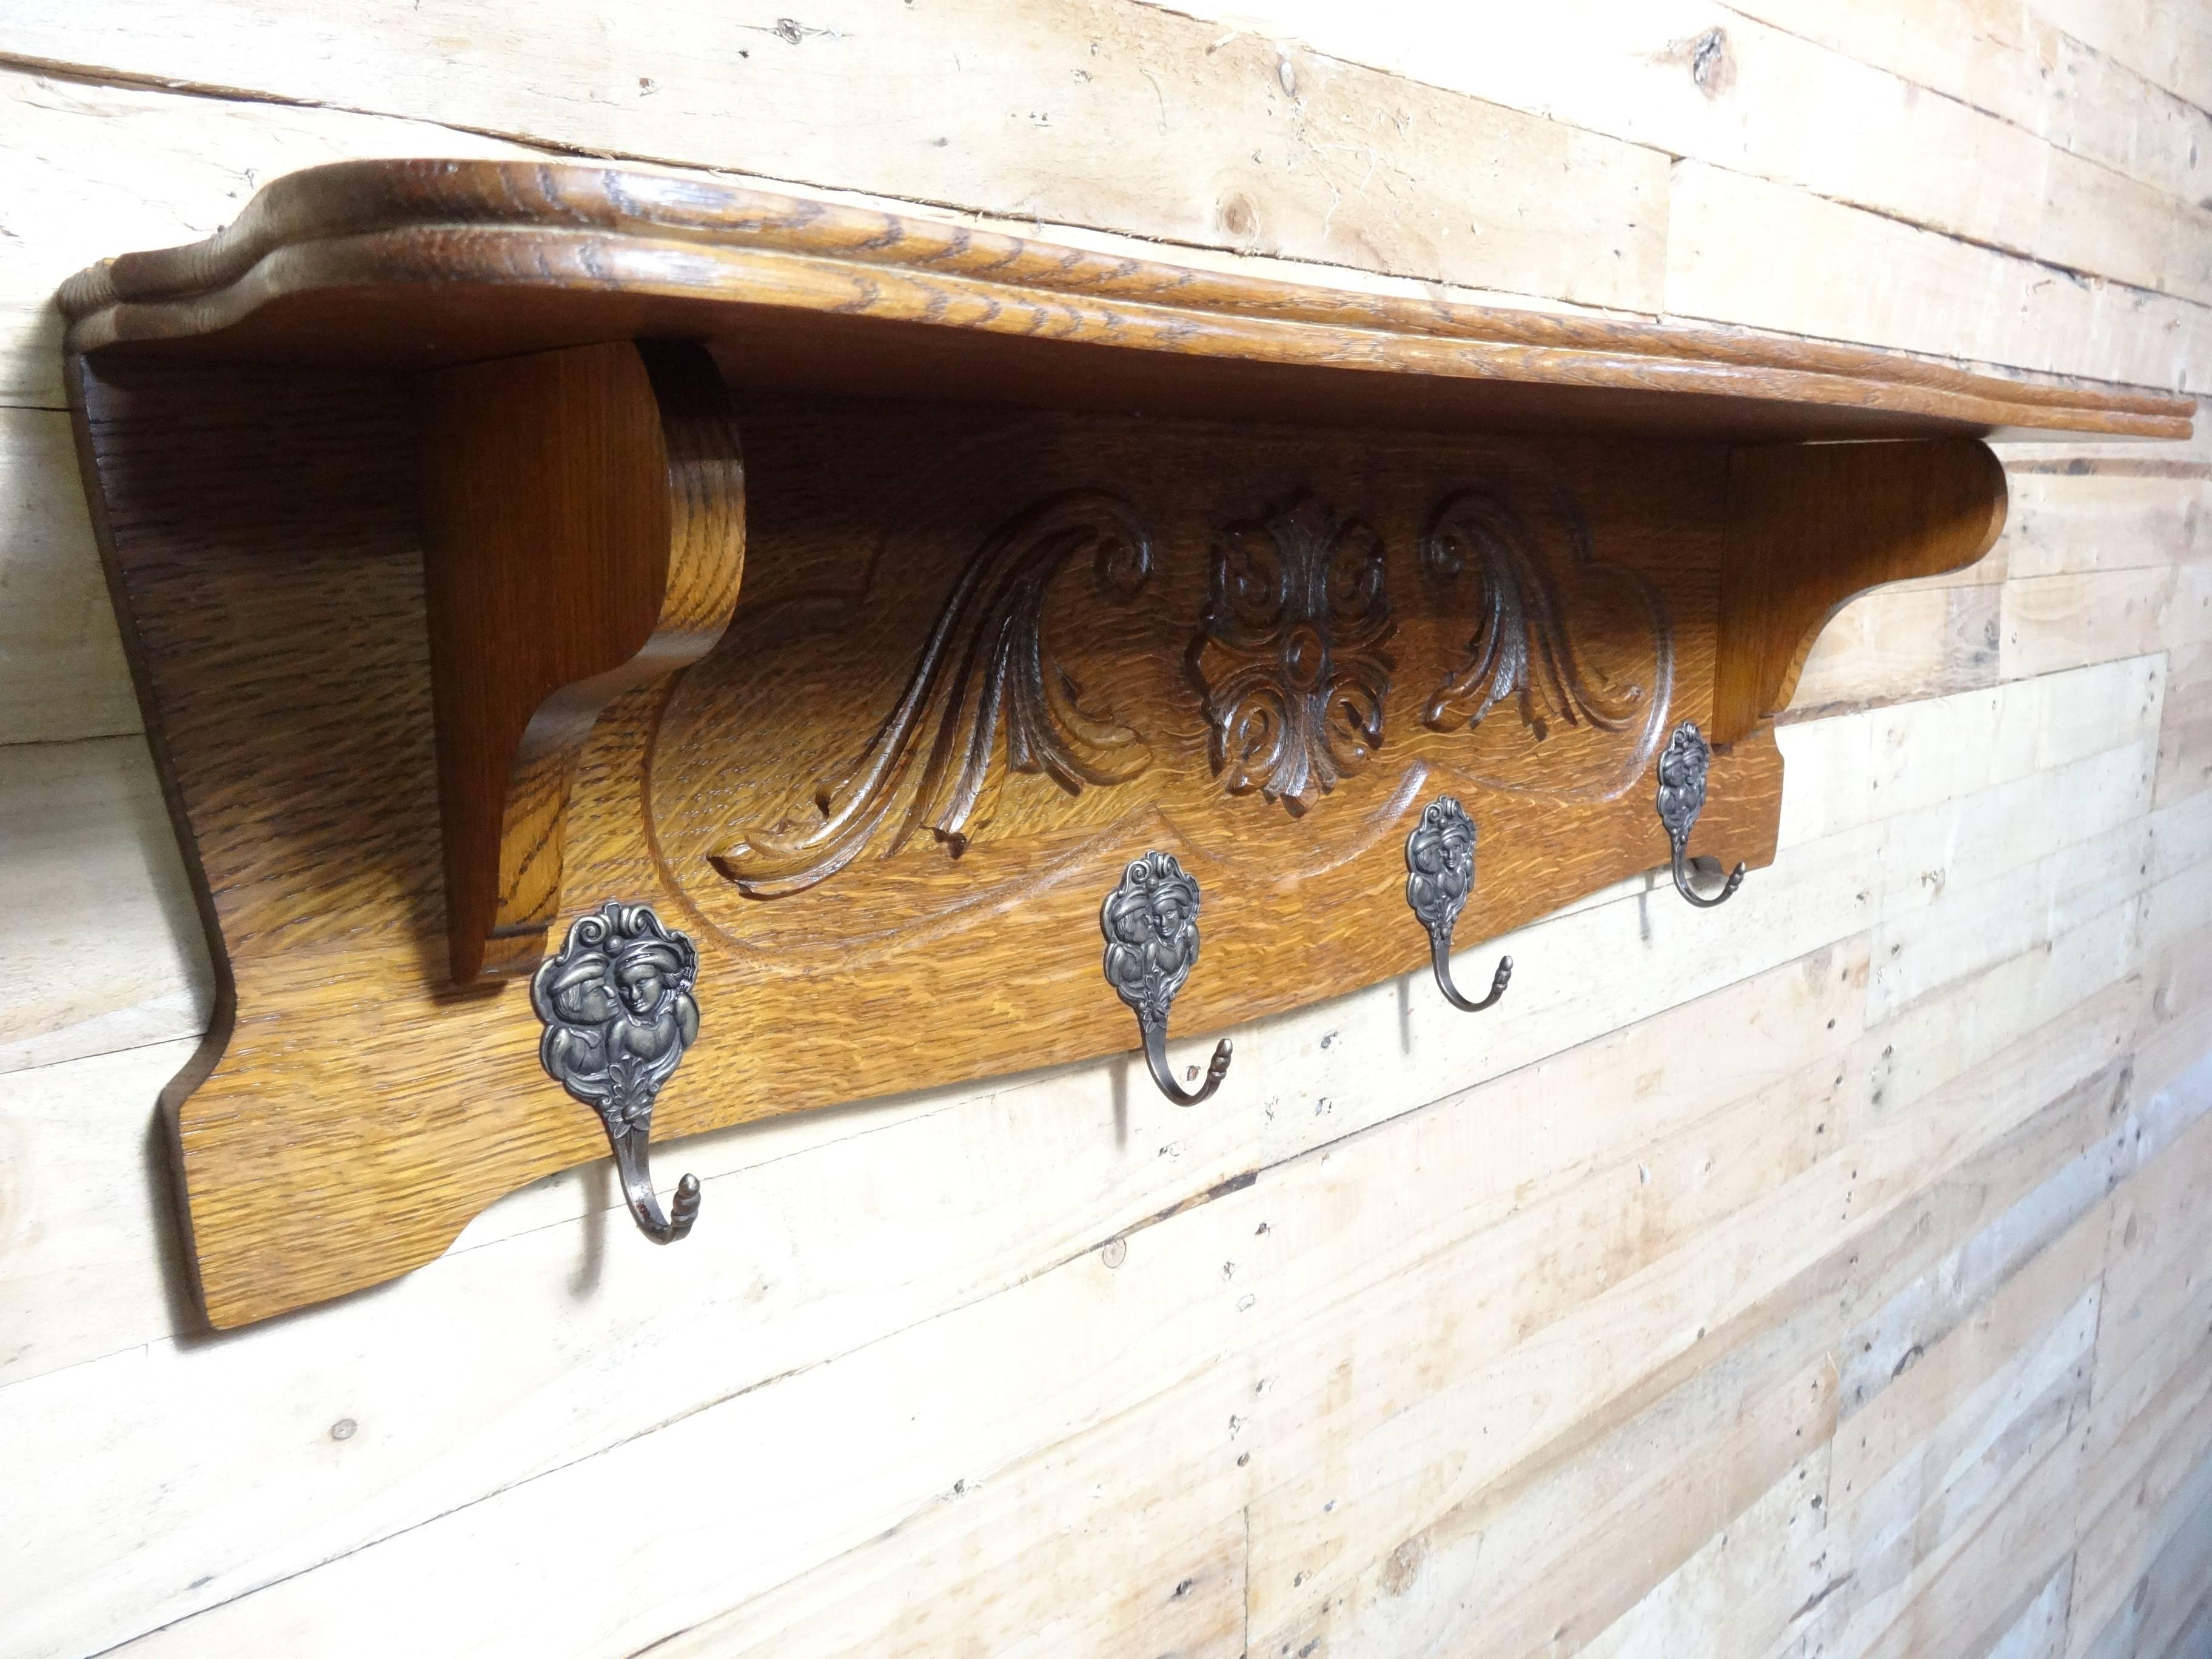 20th Century Dutch solid oak  Art & Craft Coatrack ca 1930 with some lovely wood carving